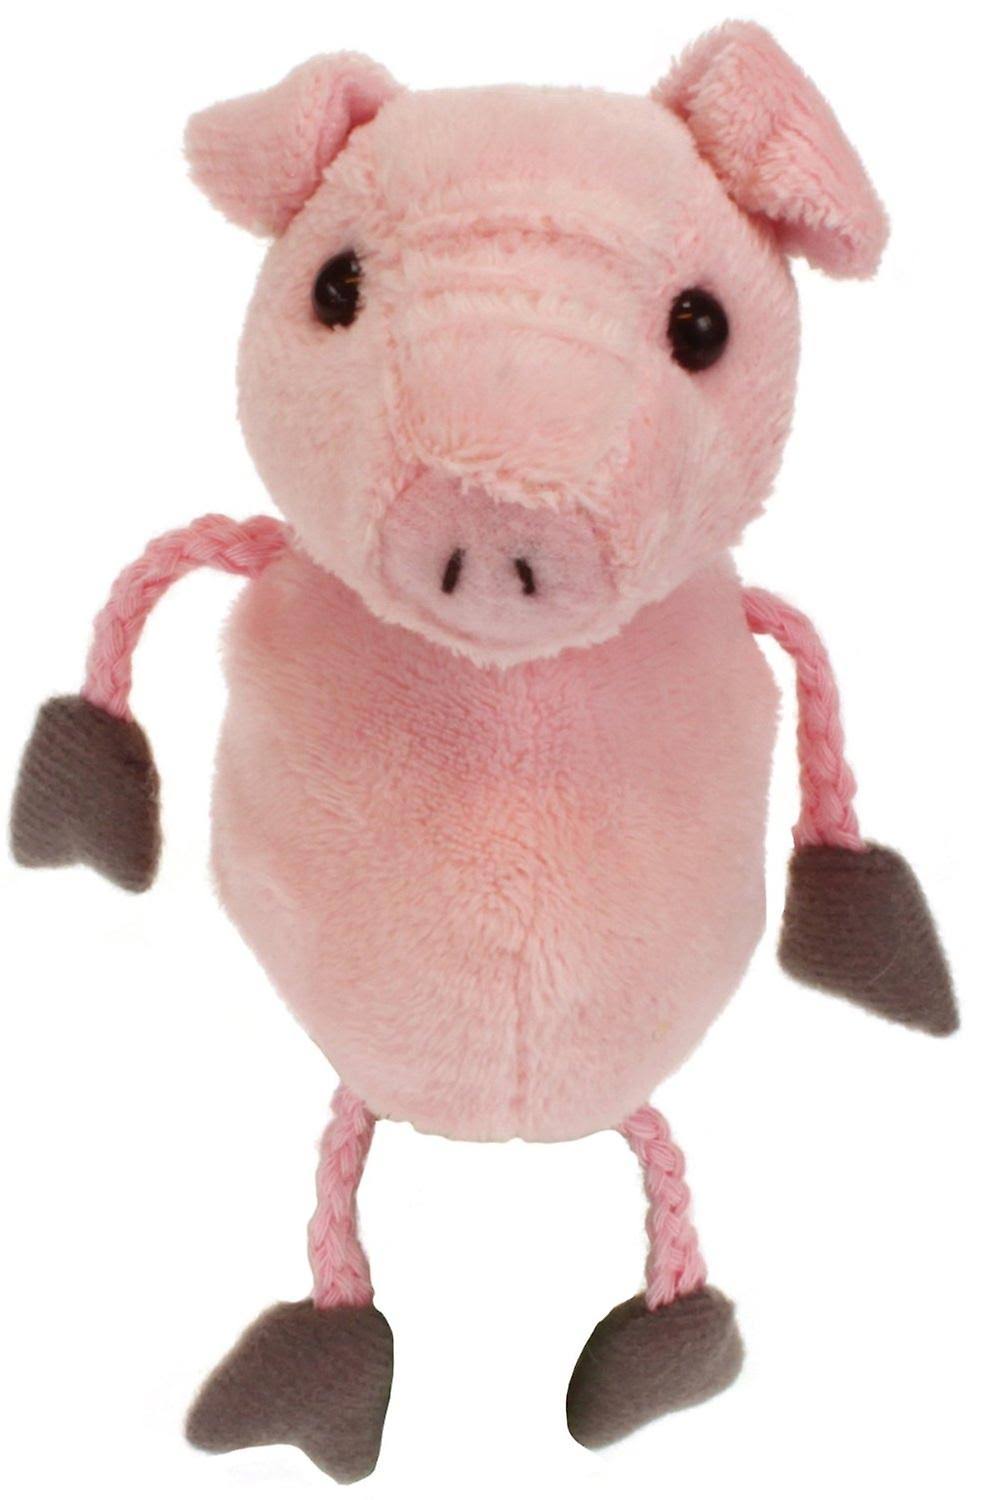 The Puppet Company Finger Pig Puppet